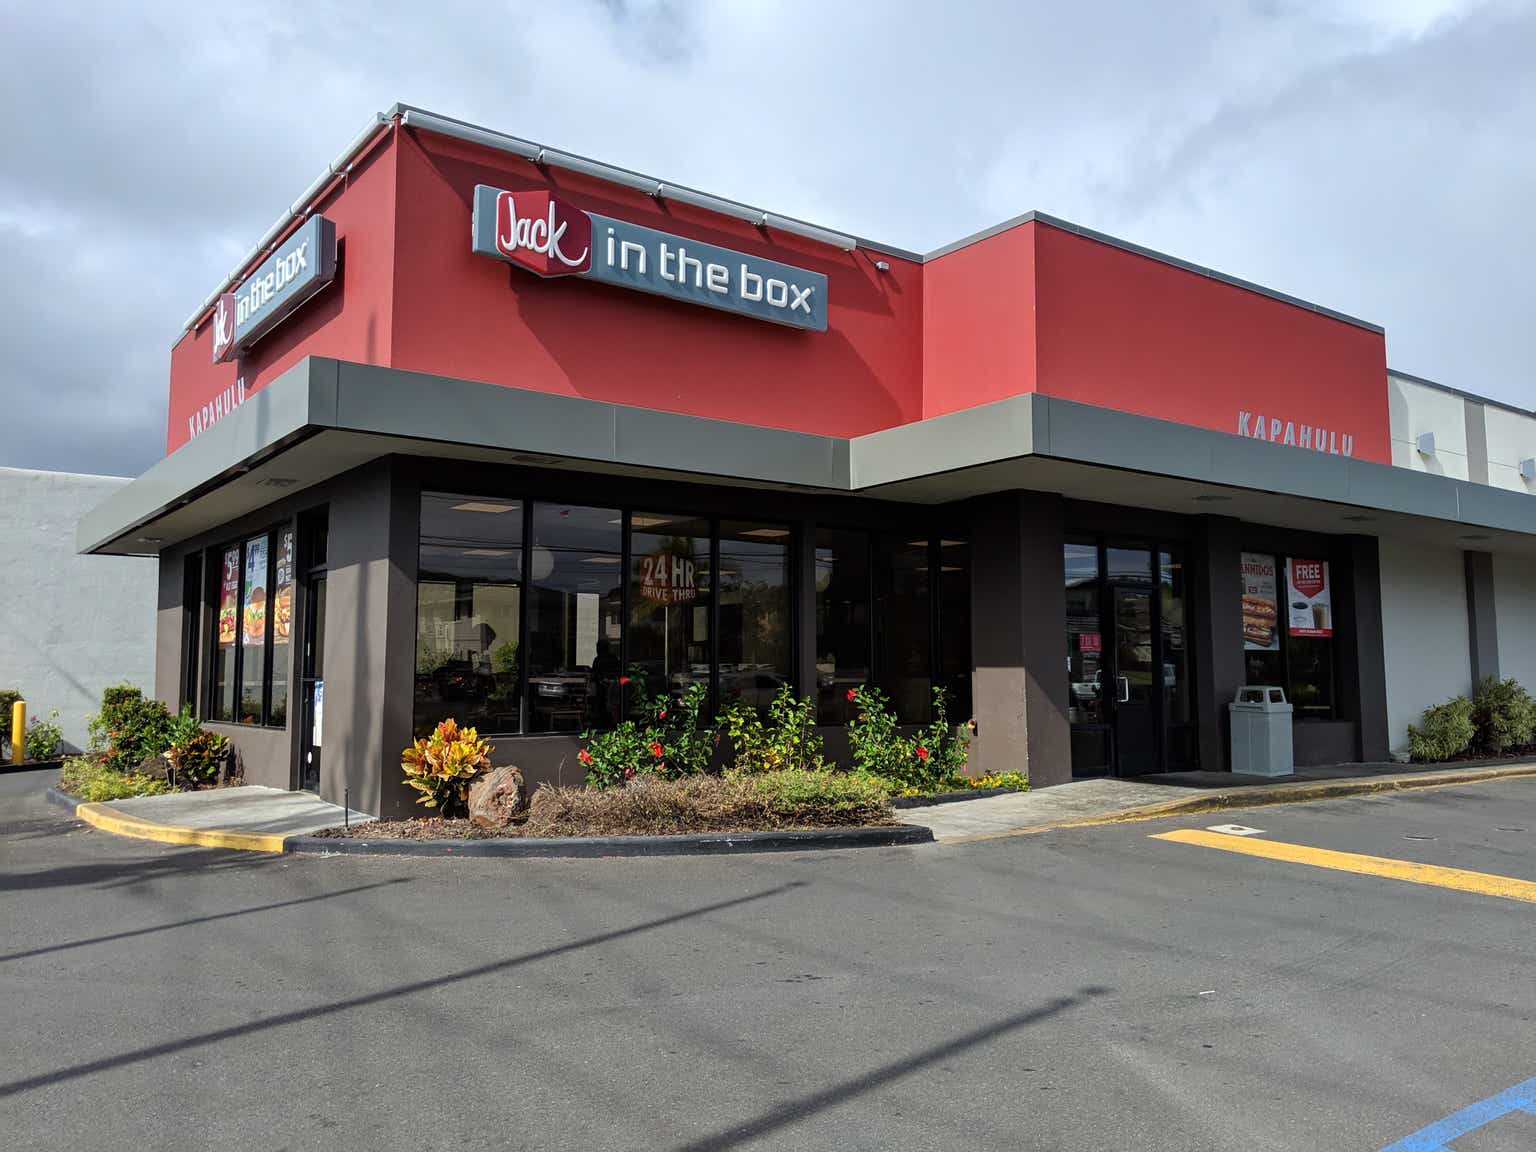 Jack in the Box: The Bad News Is Priced In